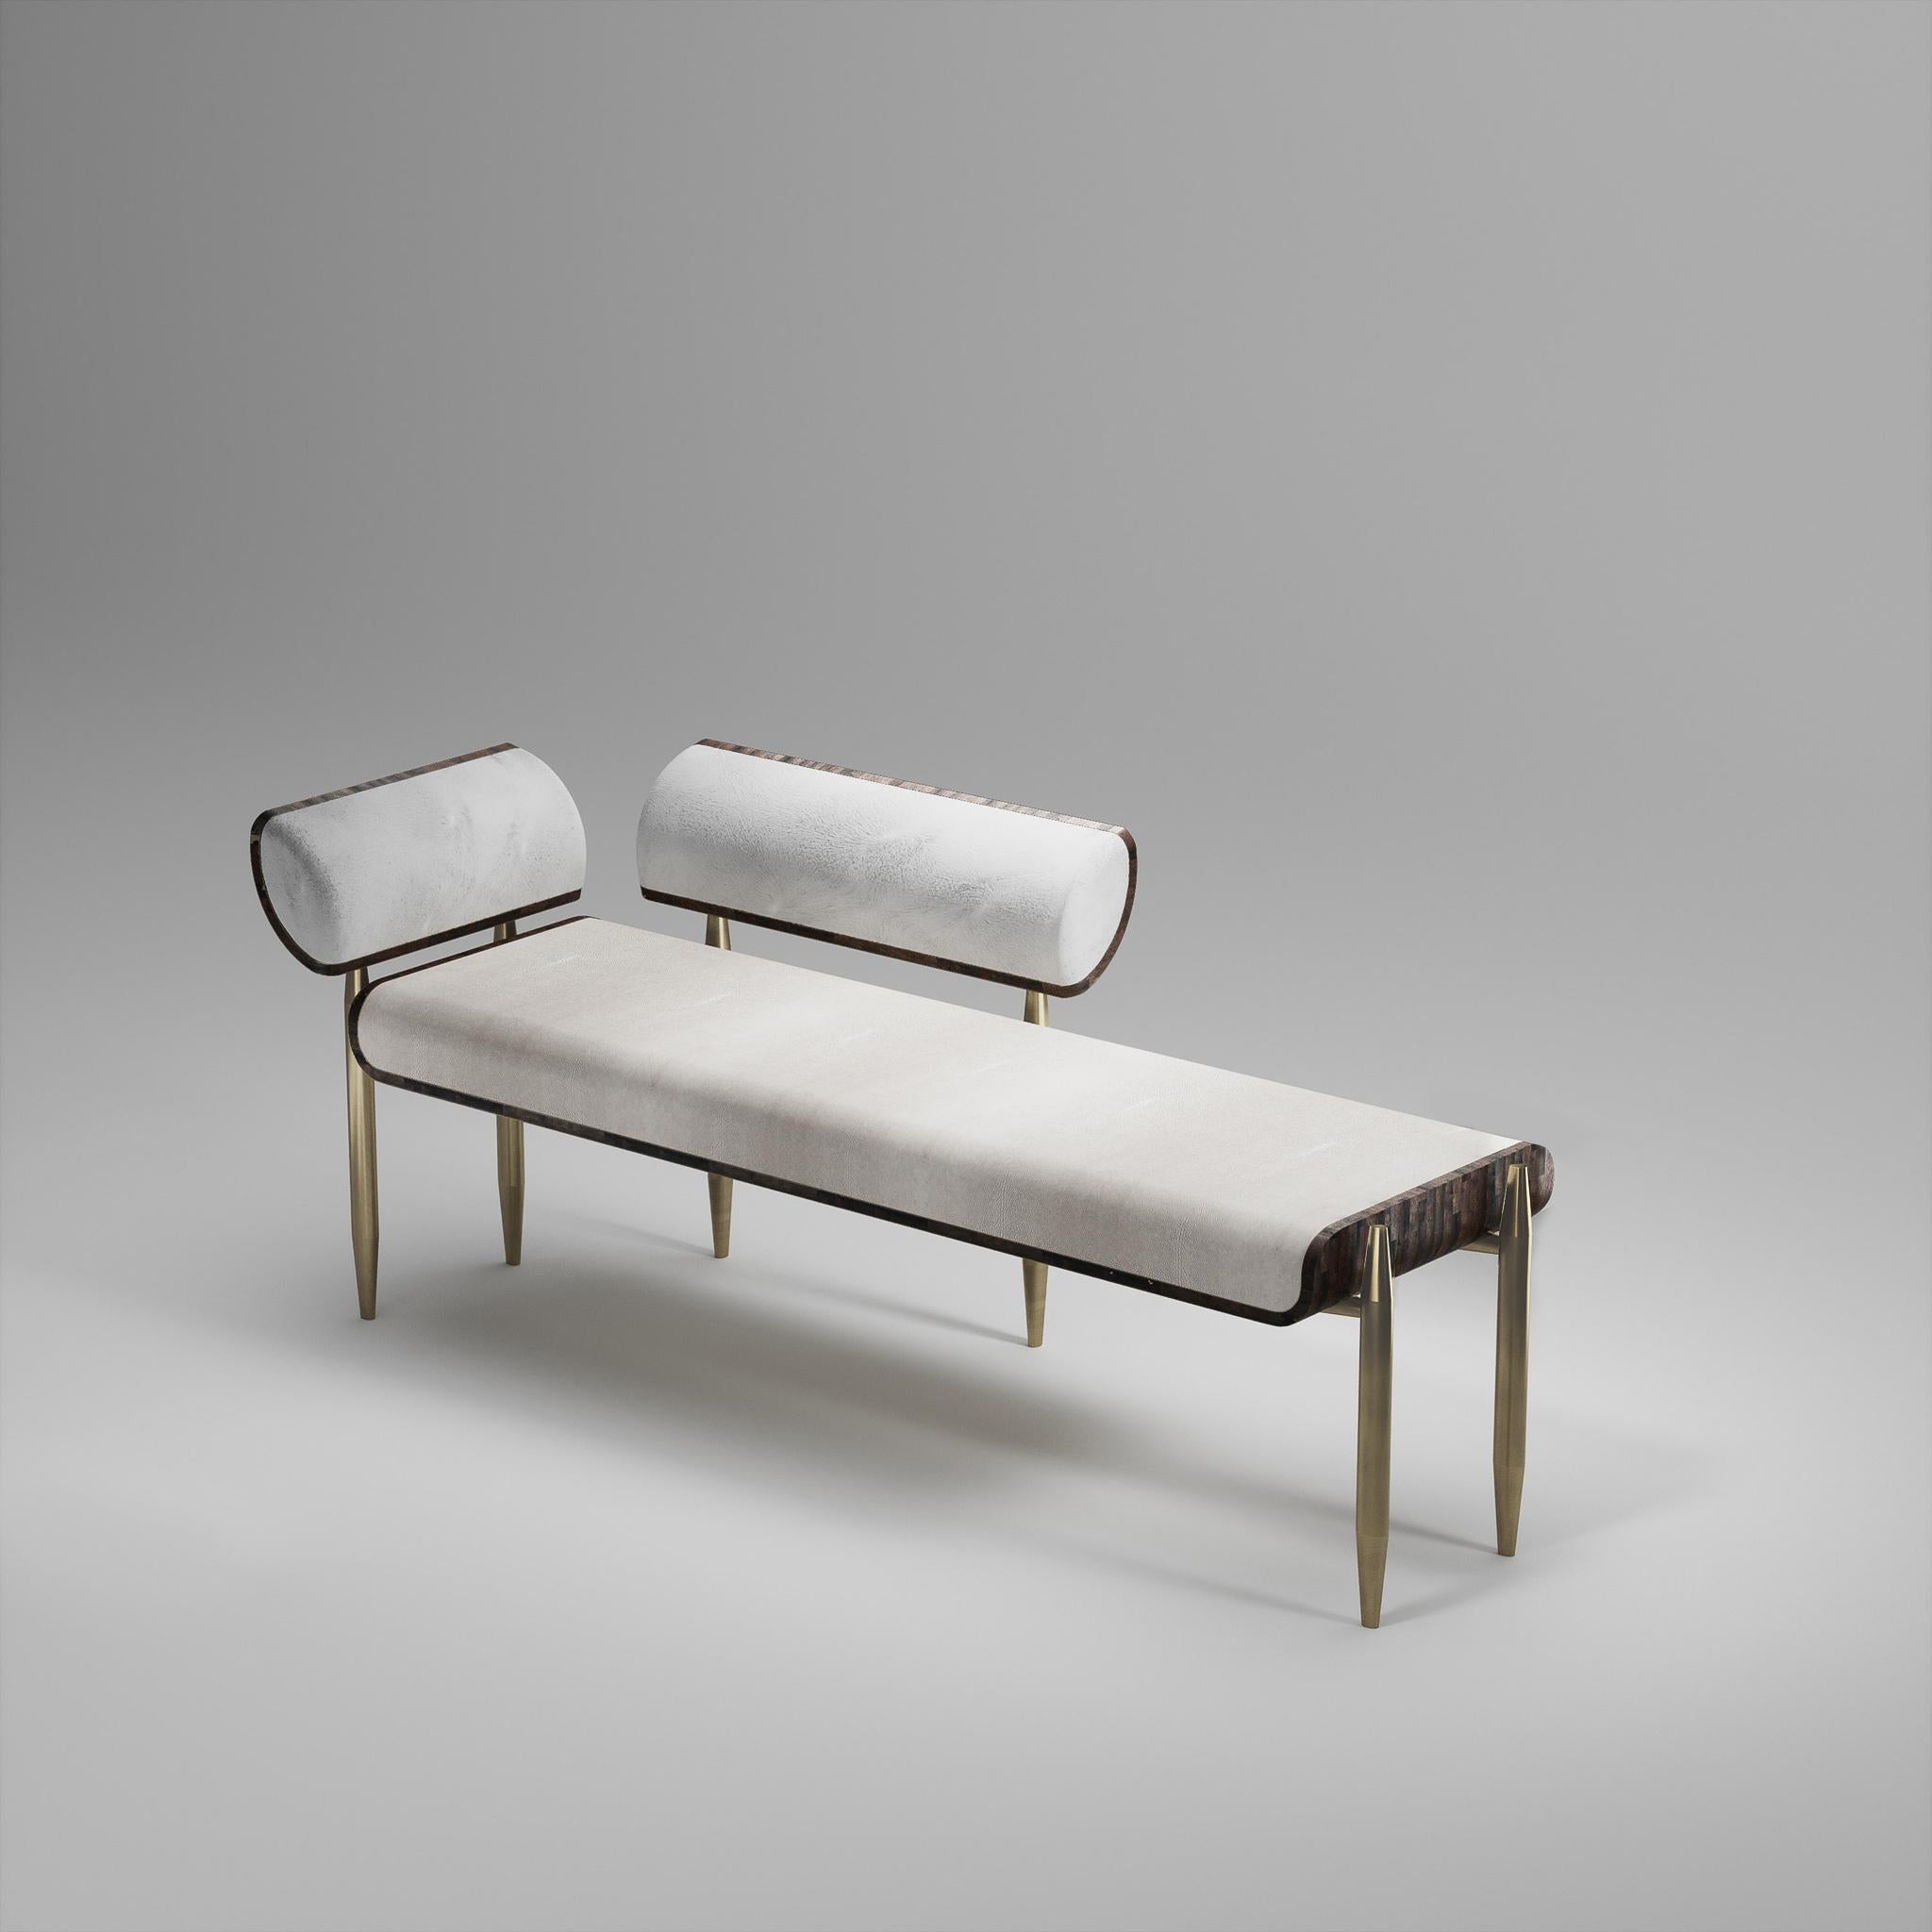 French Shagreen Bench with Palmwood and Bronze-Patina Brass Details by Kifu Paris For Sale